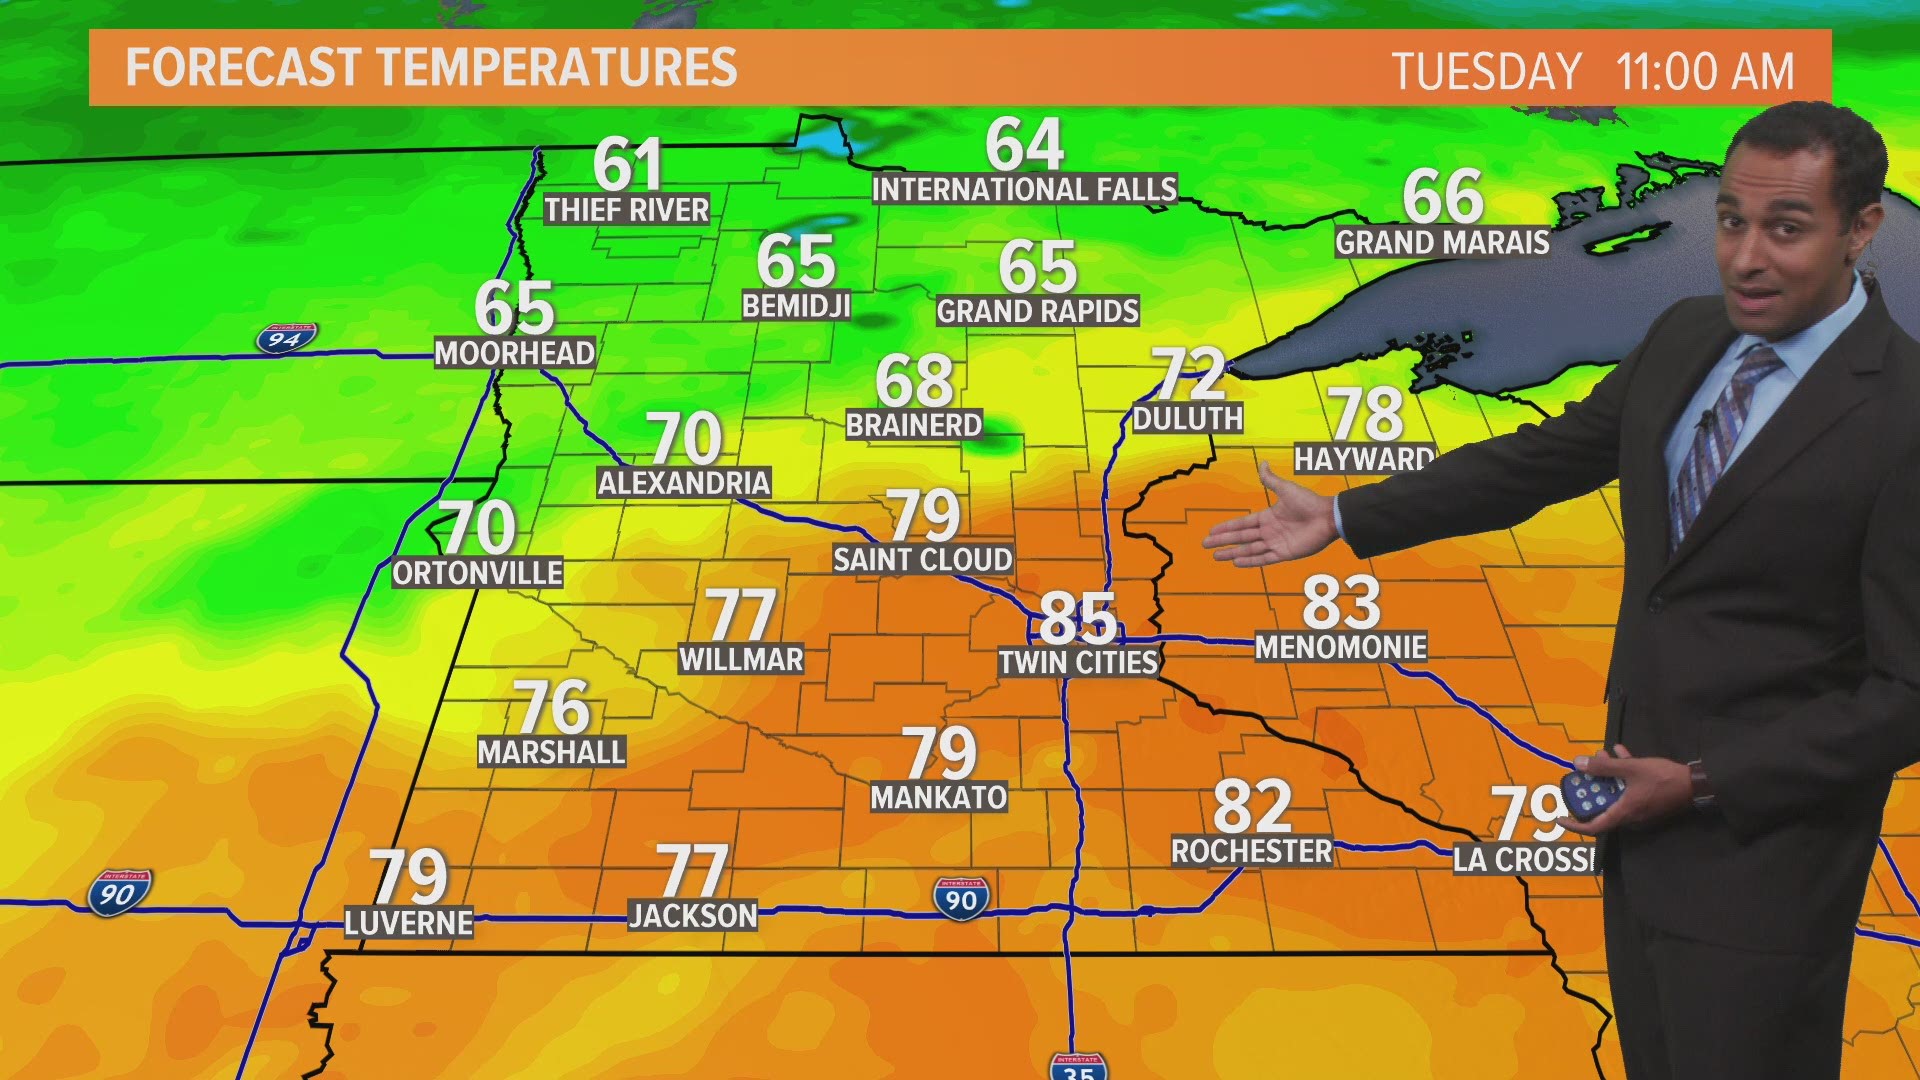 A few storms are possible on Tuesday - our only chance of rain this week. http://kare11.tv/2iTedyz